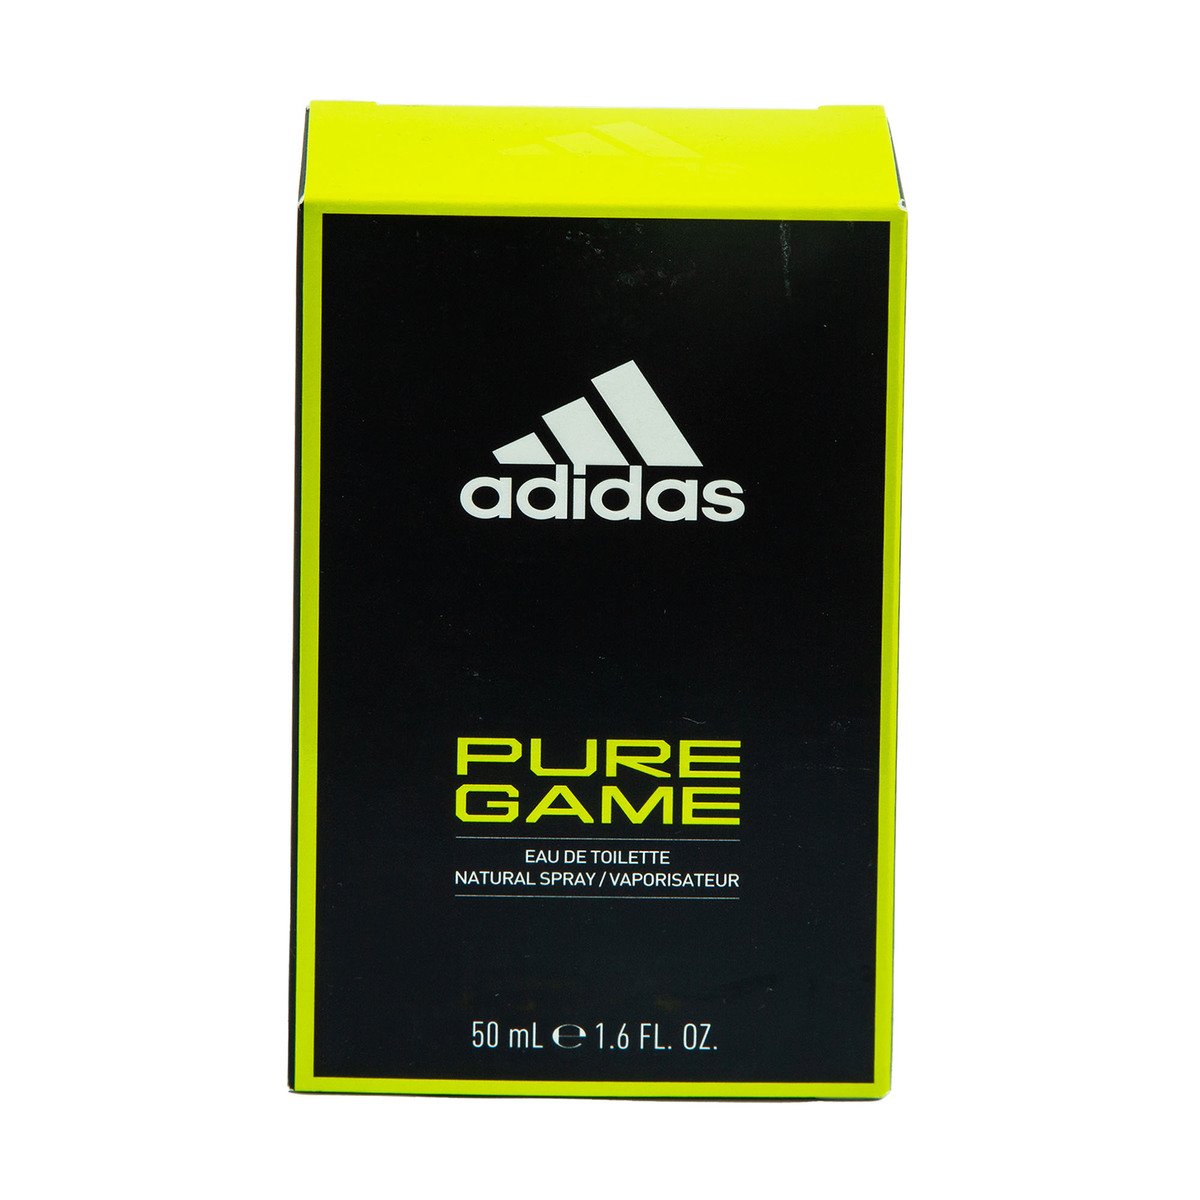 Adidas EDT Pure Game Natural Spray 50 ml